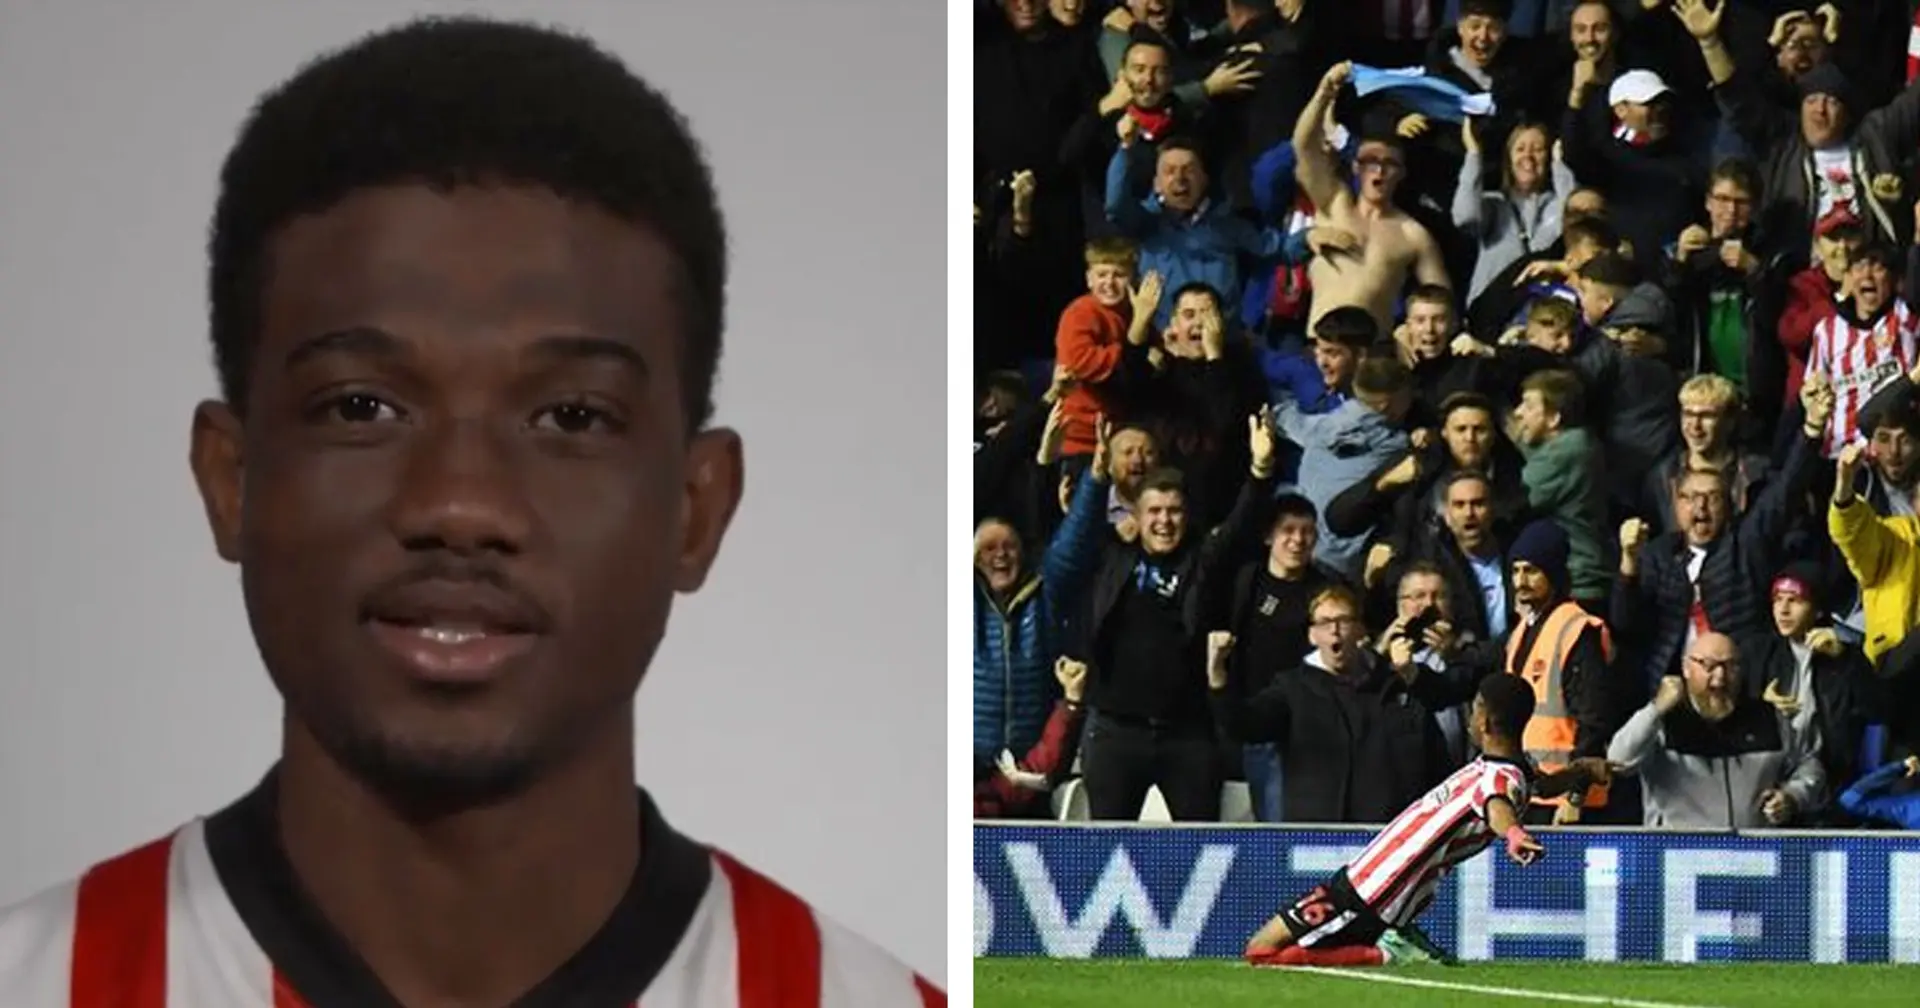 Amad Diallo responds to Sunderland fans' 'biggest d*** in the league' chant for him